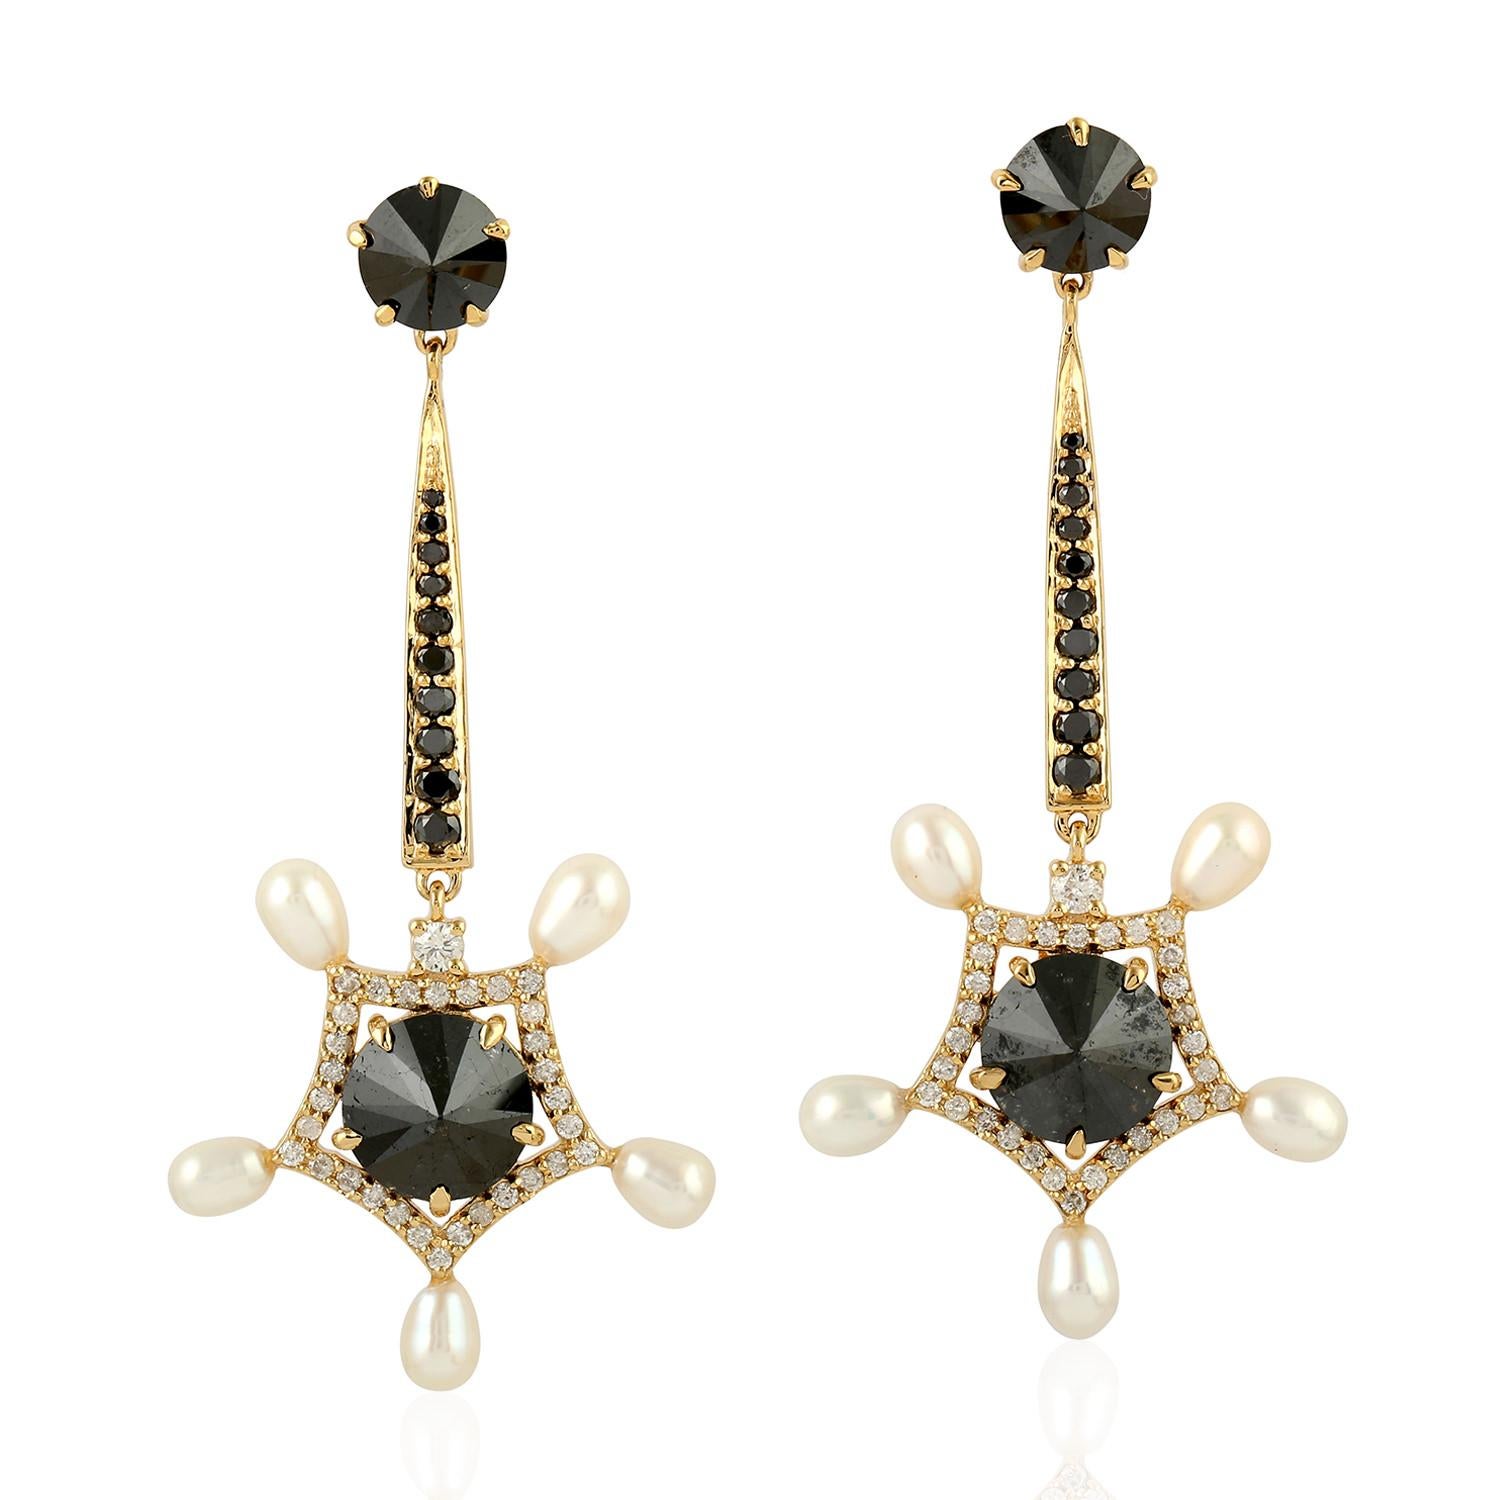 Mixed Cut Black and White Diamonds Dangle Earrings With Pearl Made In 18k Yellow Gold For Sale